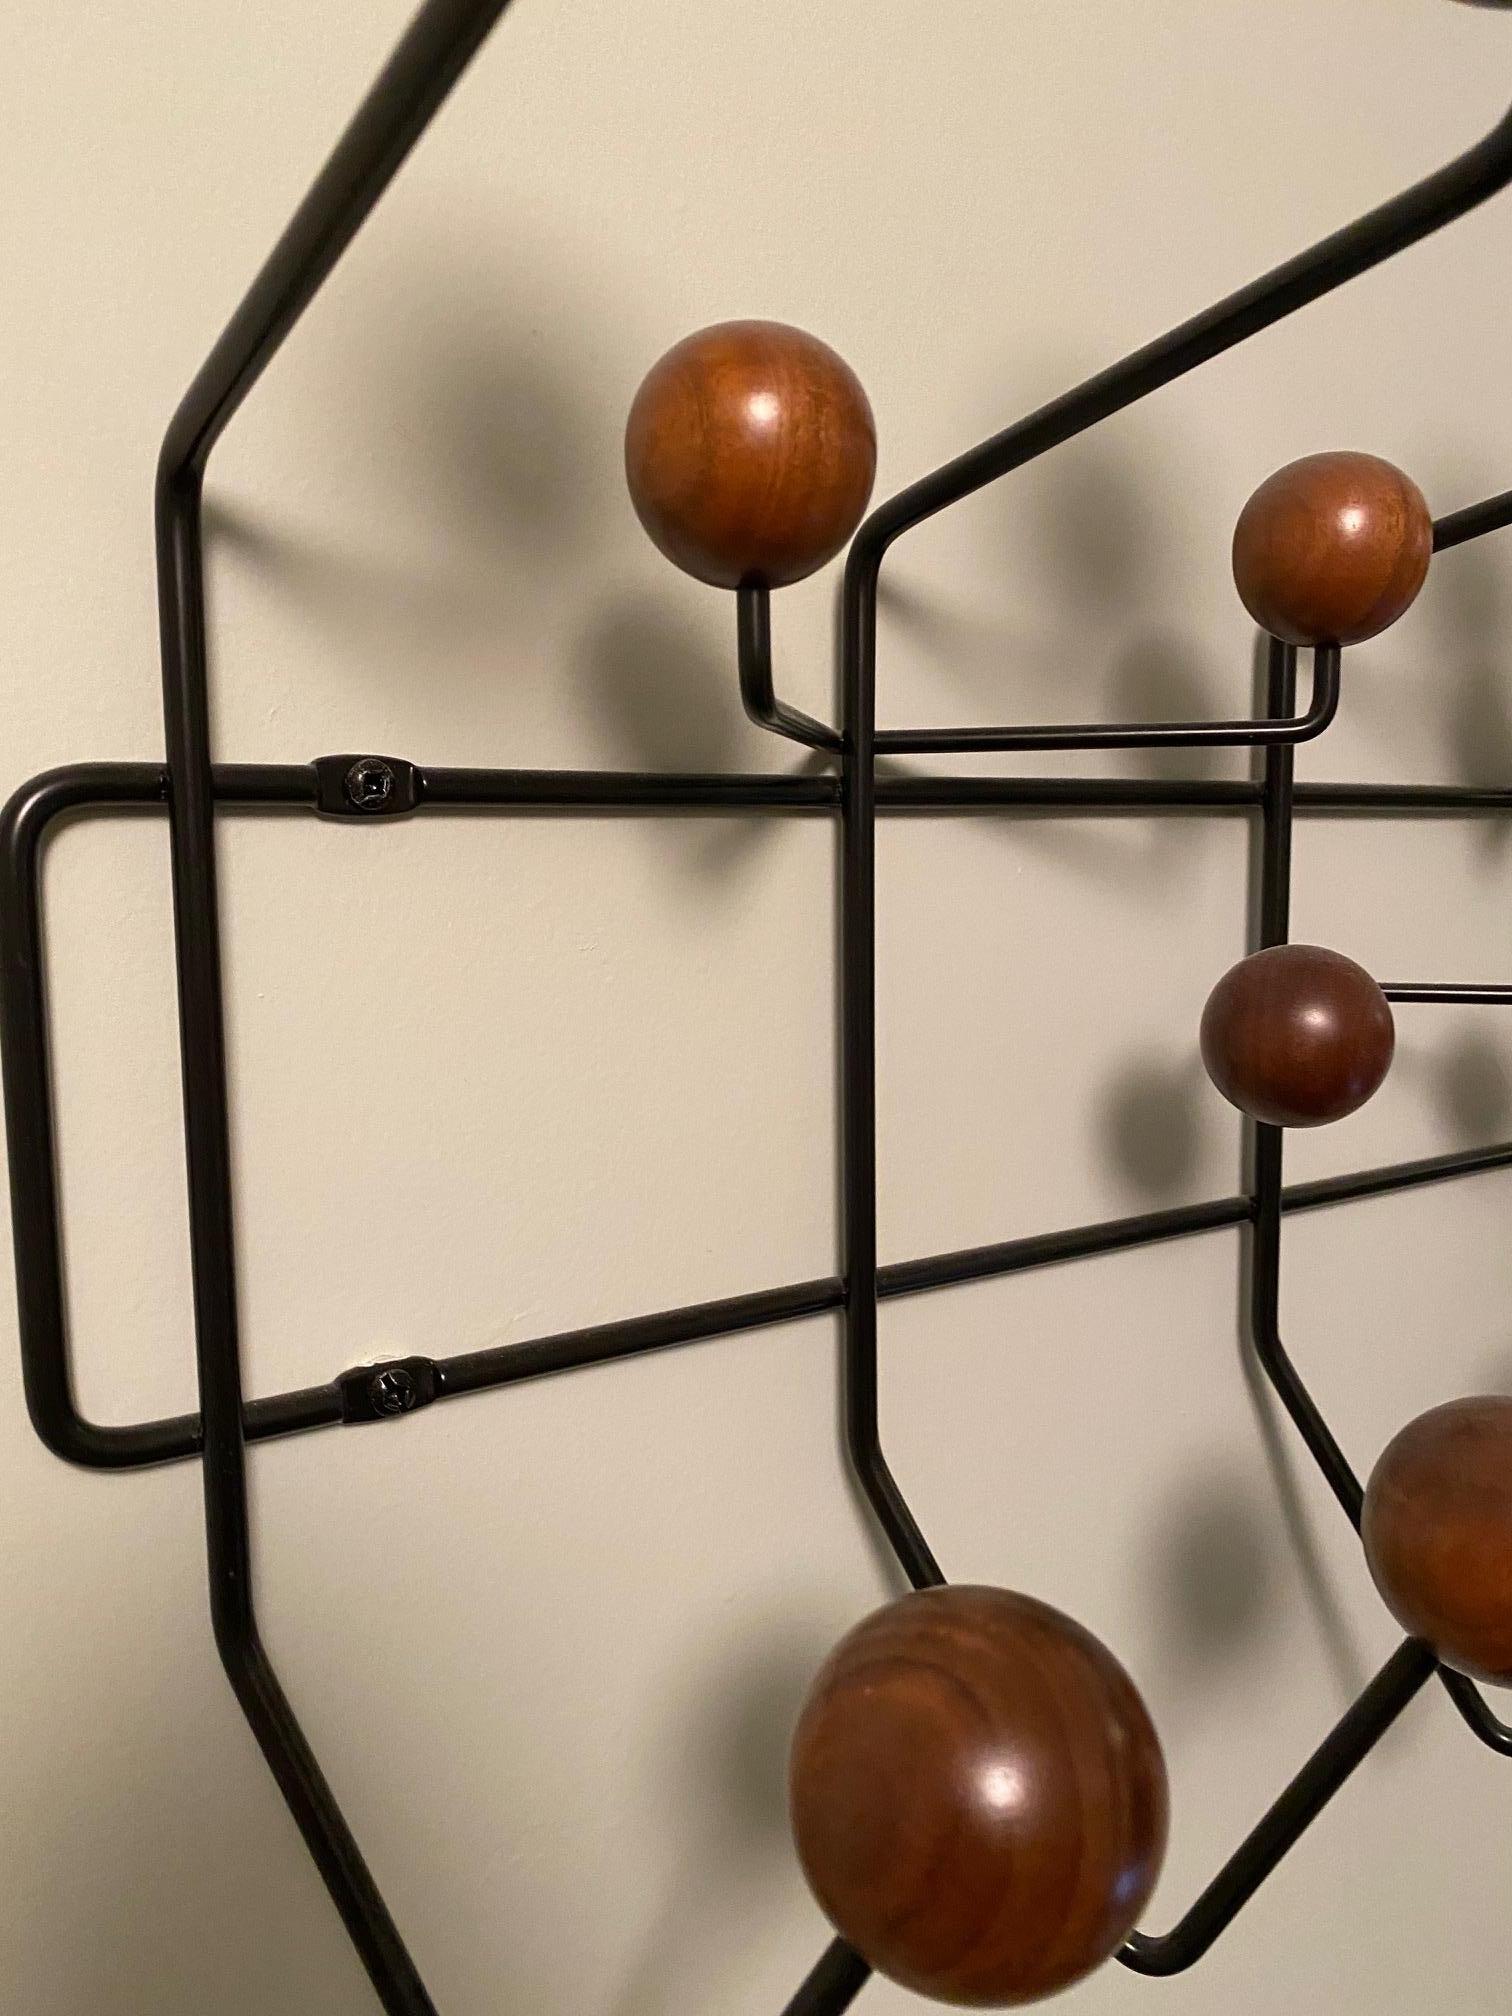 Eames Hang-It-All Designed by Charles and Ray Eames, produced by Herman Miller 5